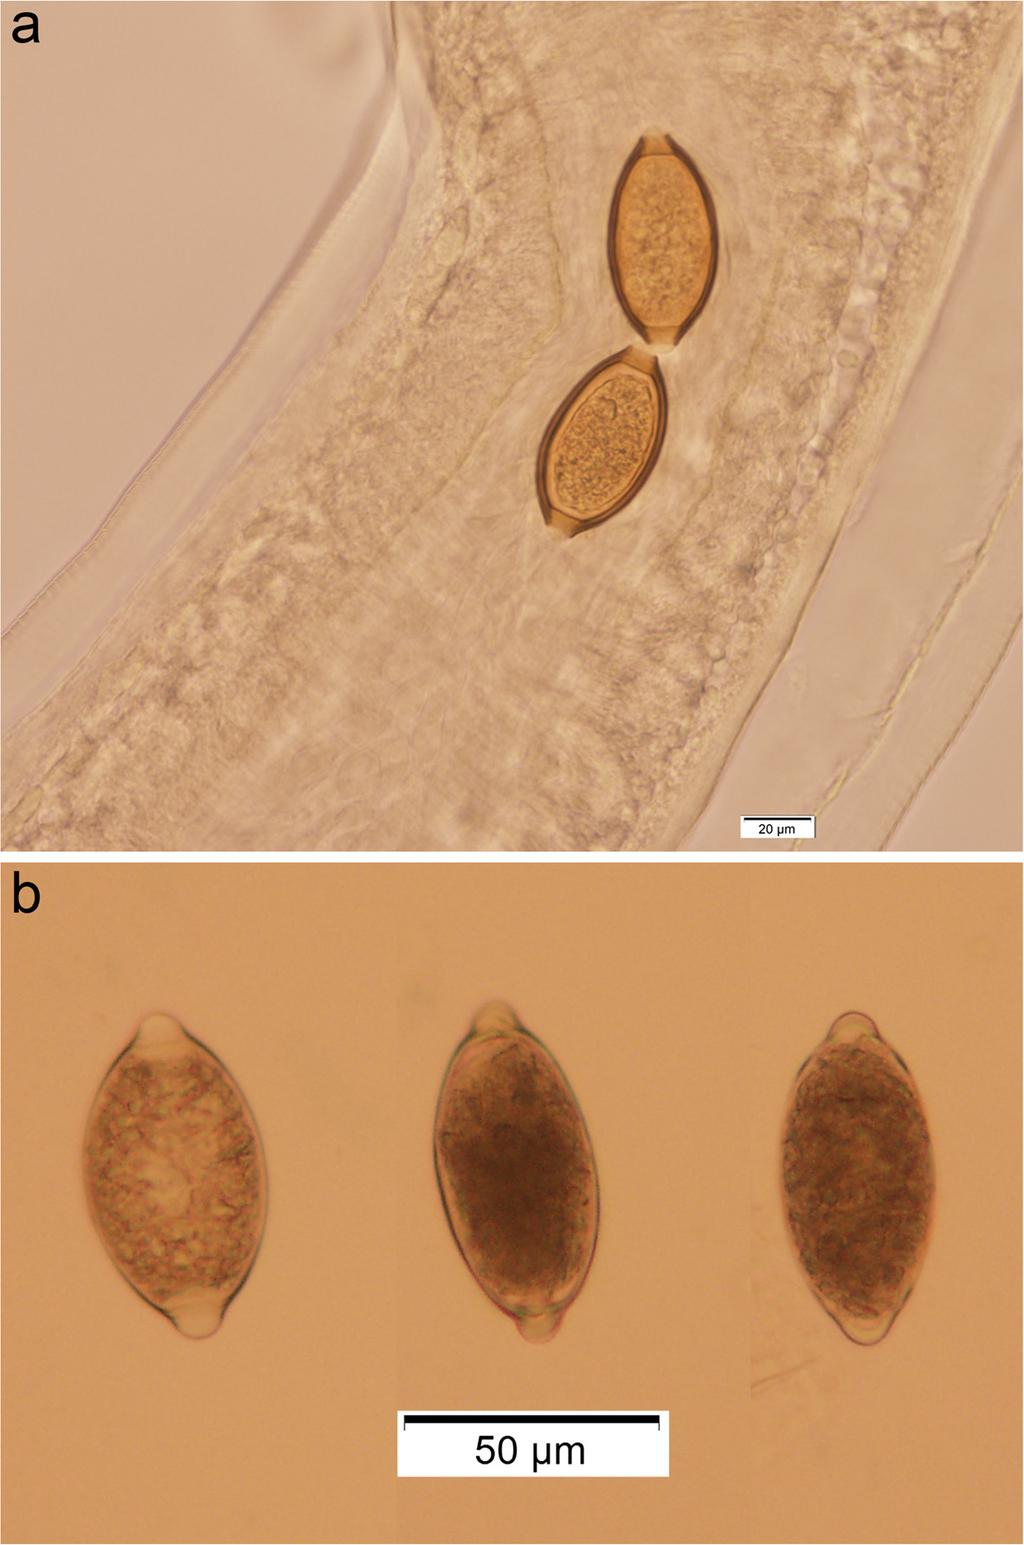 Ketzis SpringerPlus (2015) 4:115 Page 6 of 7 Figure 3 a and b Trichuris eggs (100x) of different sizes seen with a fecal flotation from one St. Kitts cat. If mislabeling occurred and only T.